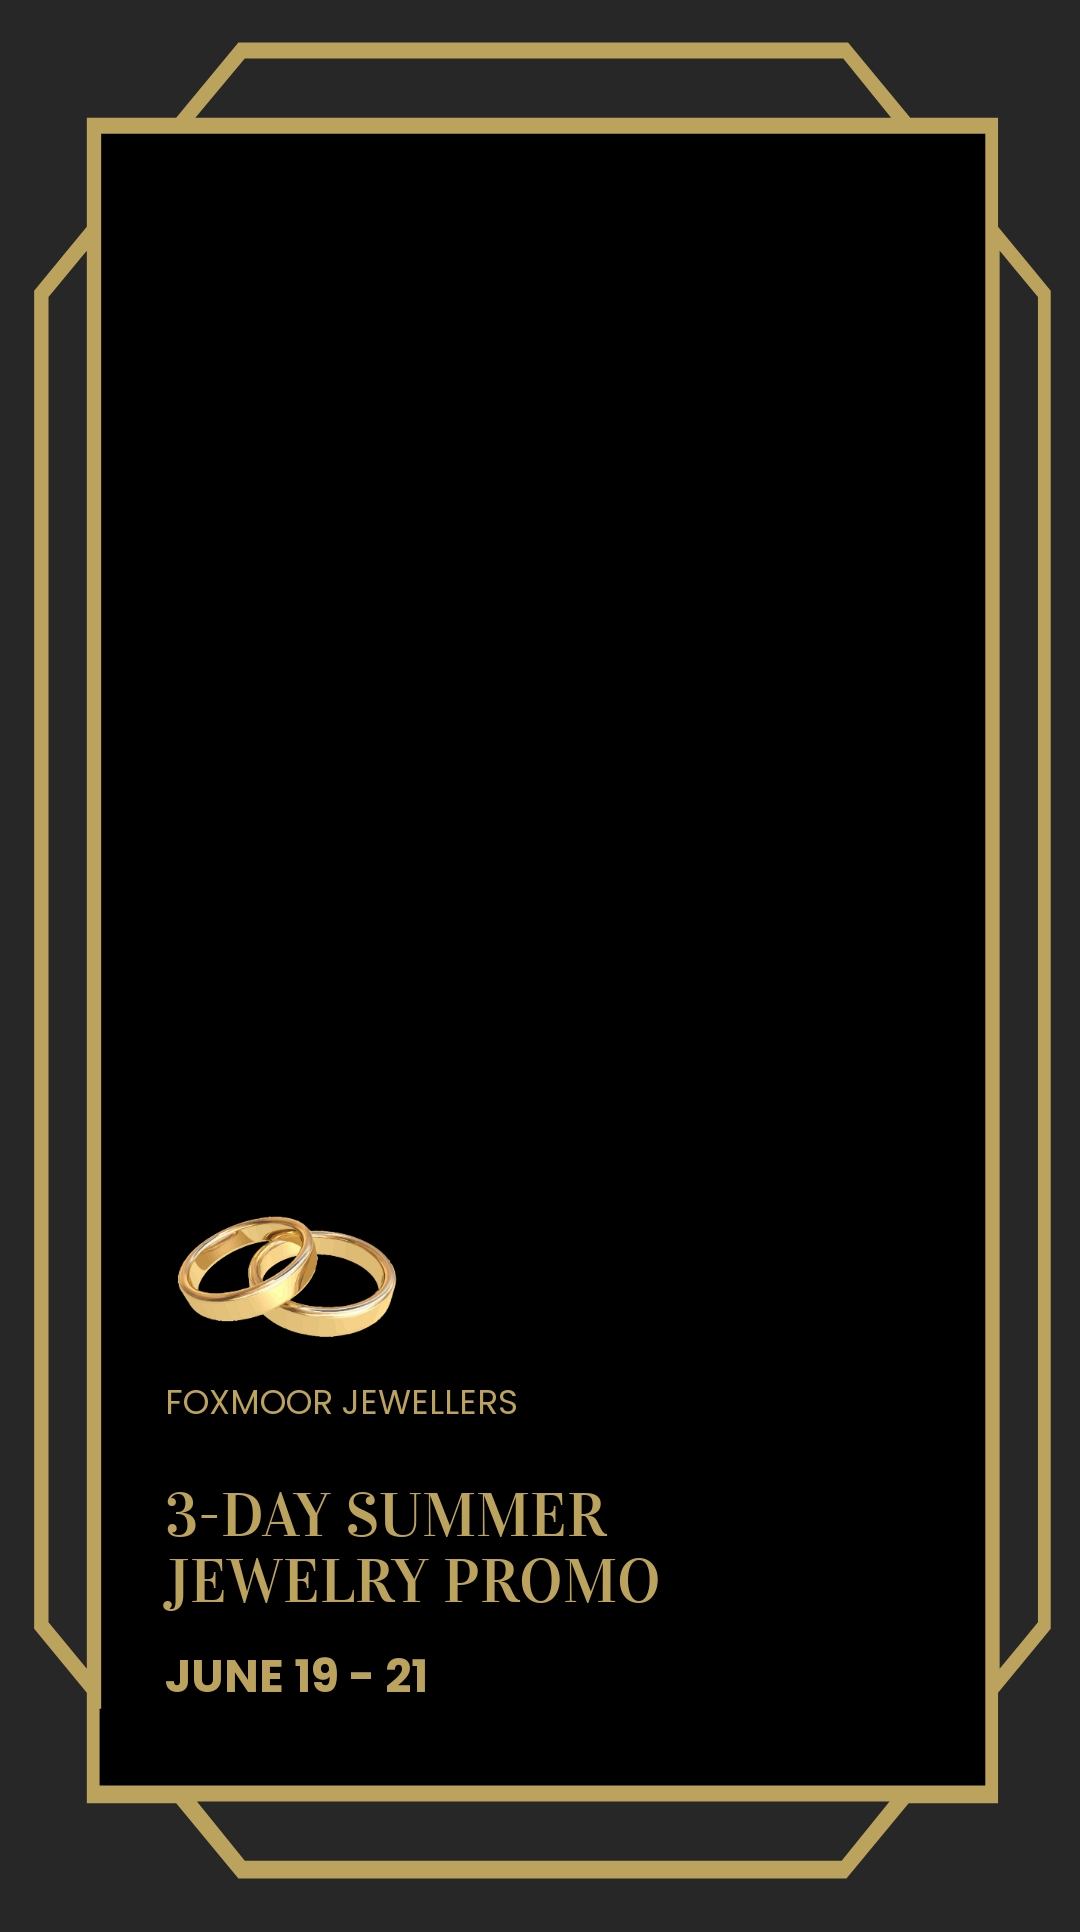 Free Jewelry Promotion Snapchat Geofilter Template